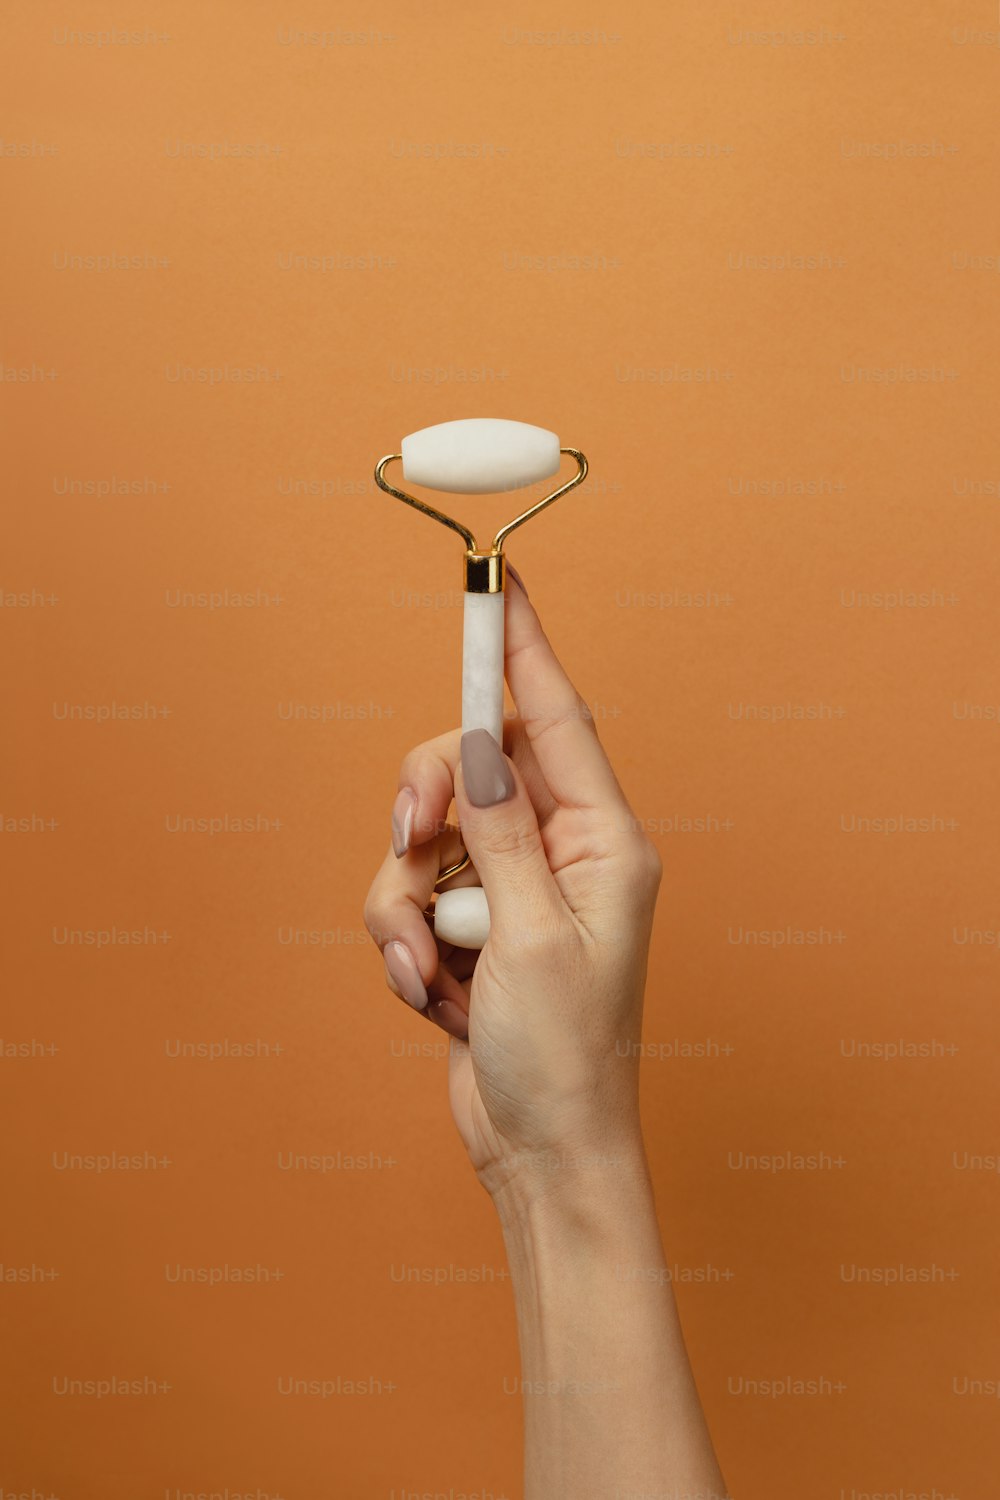 a hand holding a toothbrush in front of an orange background